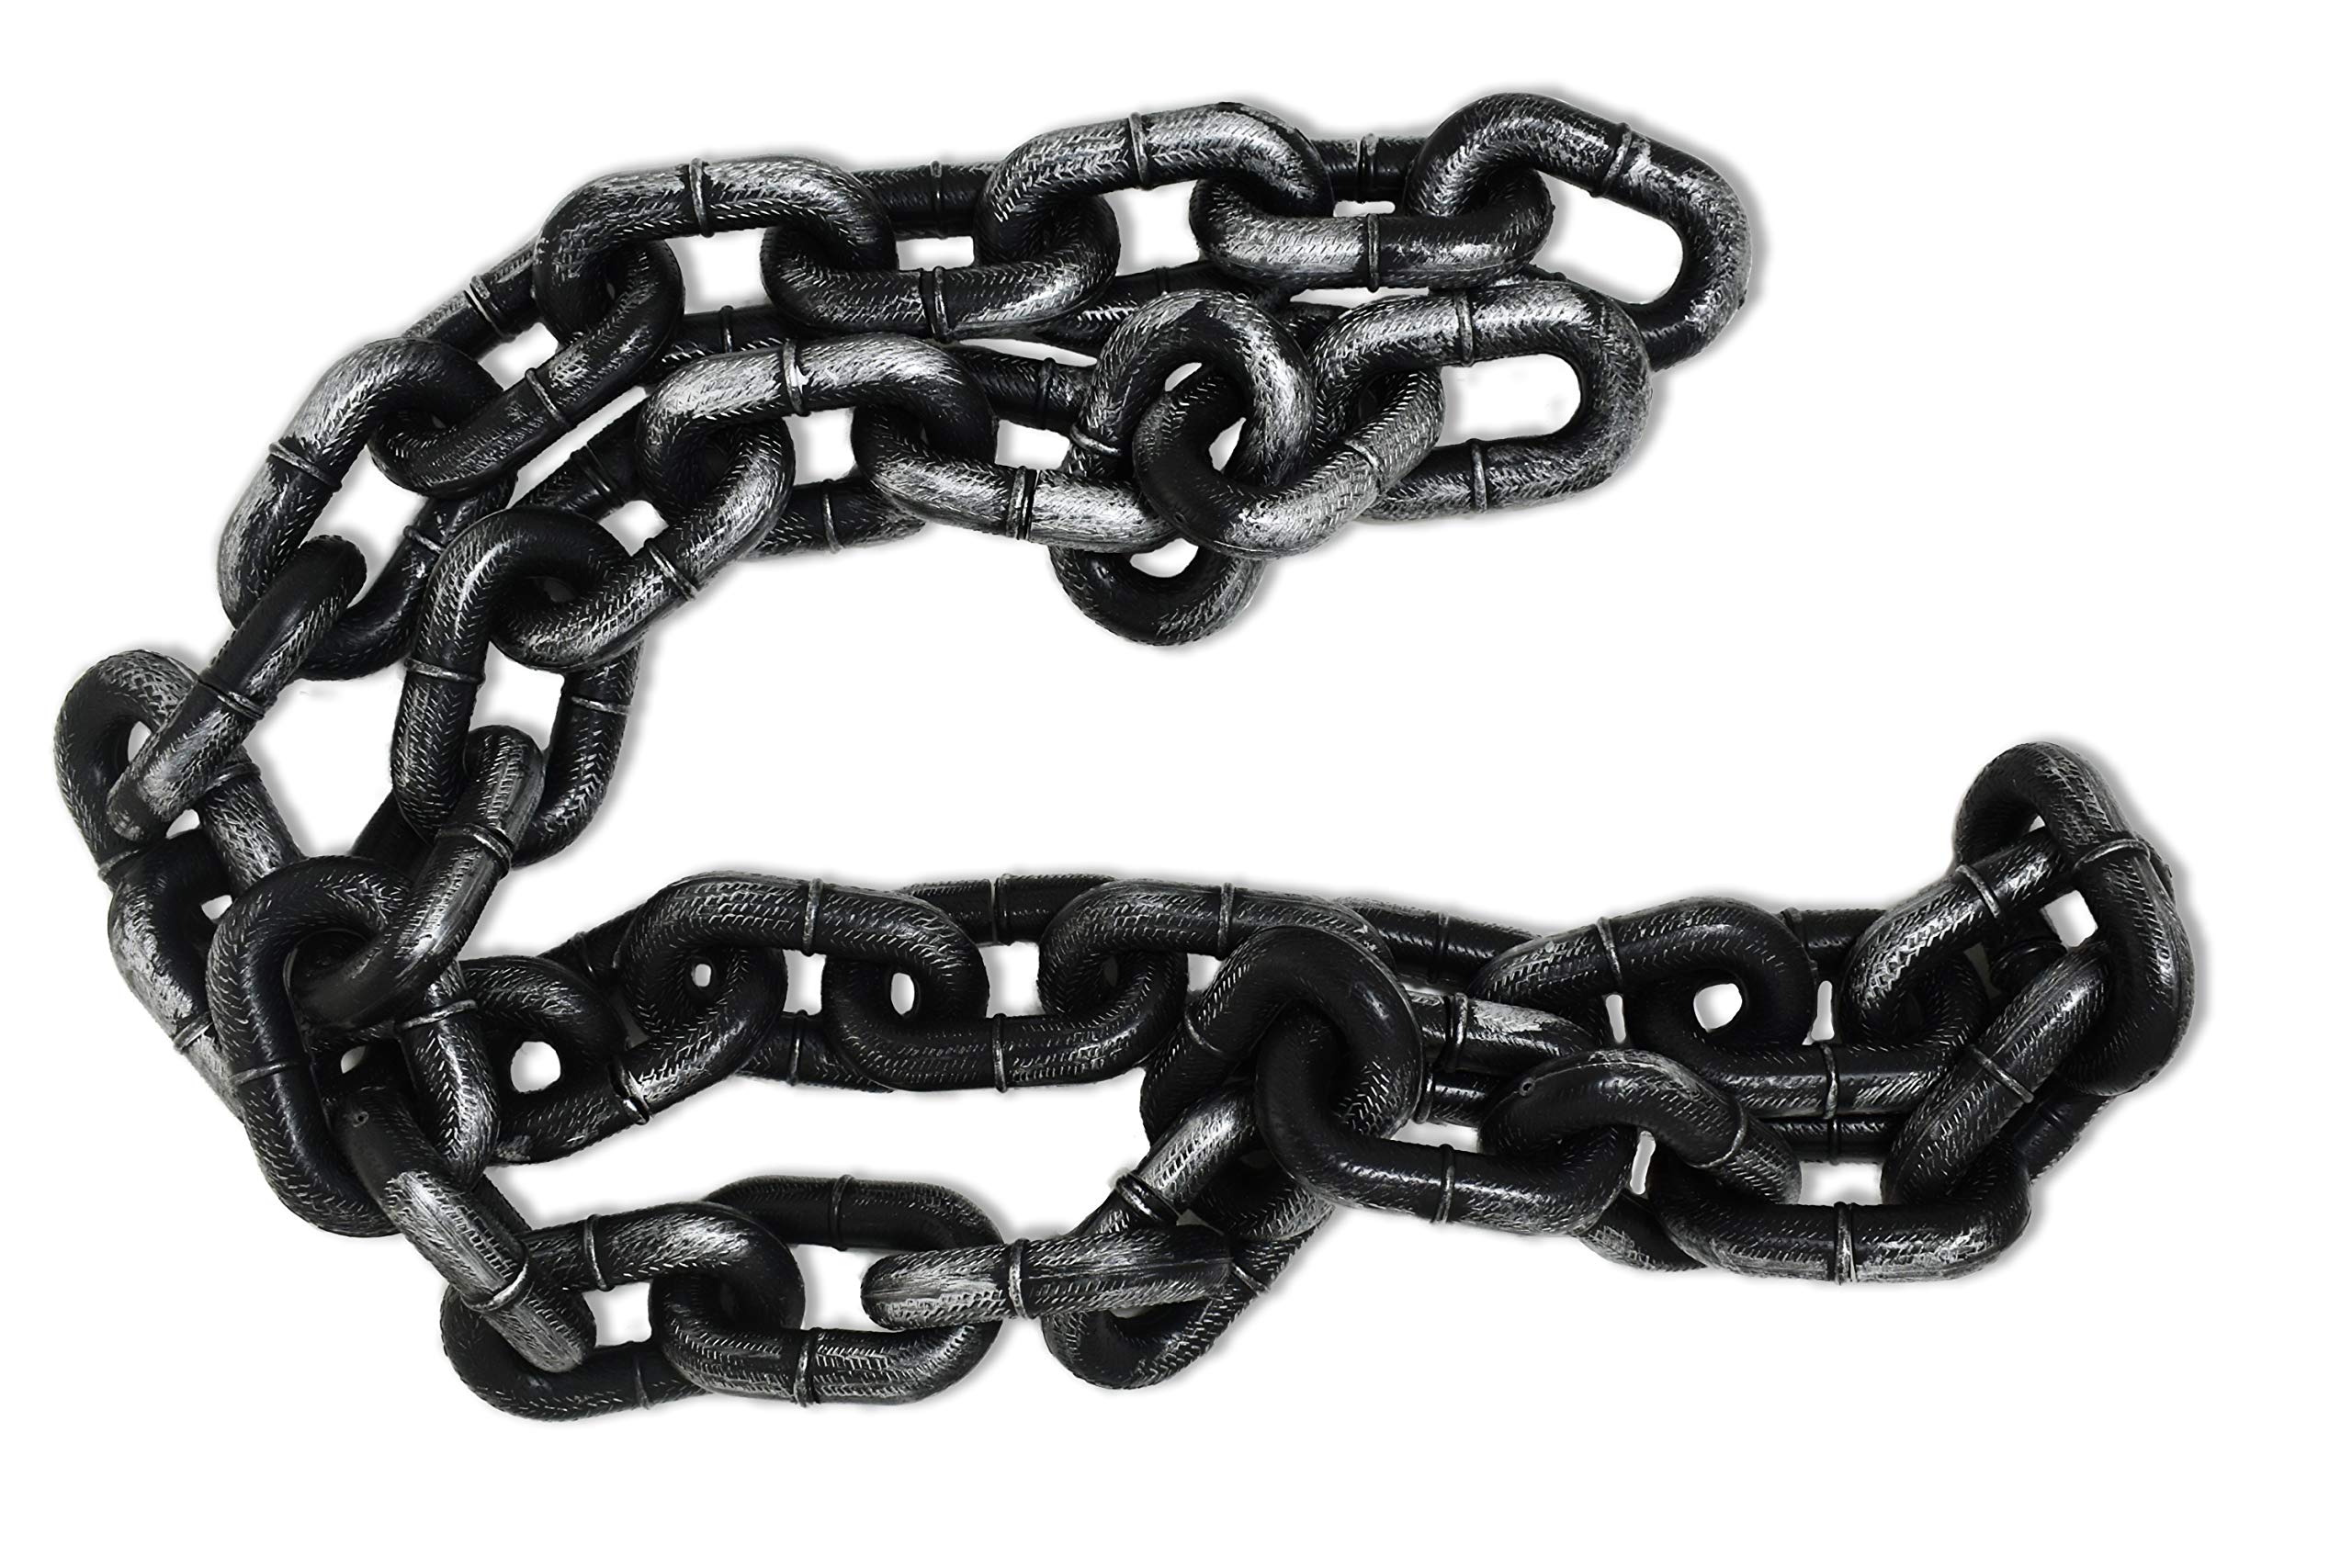 KINREX Halloween Chain Link - Halloween Costume Accessory Decoration - Grey and Black - Made of Plastic - Measures 74 Inches